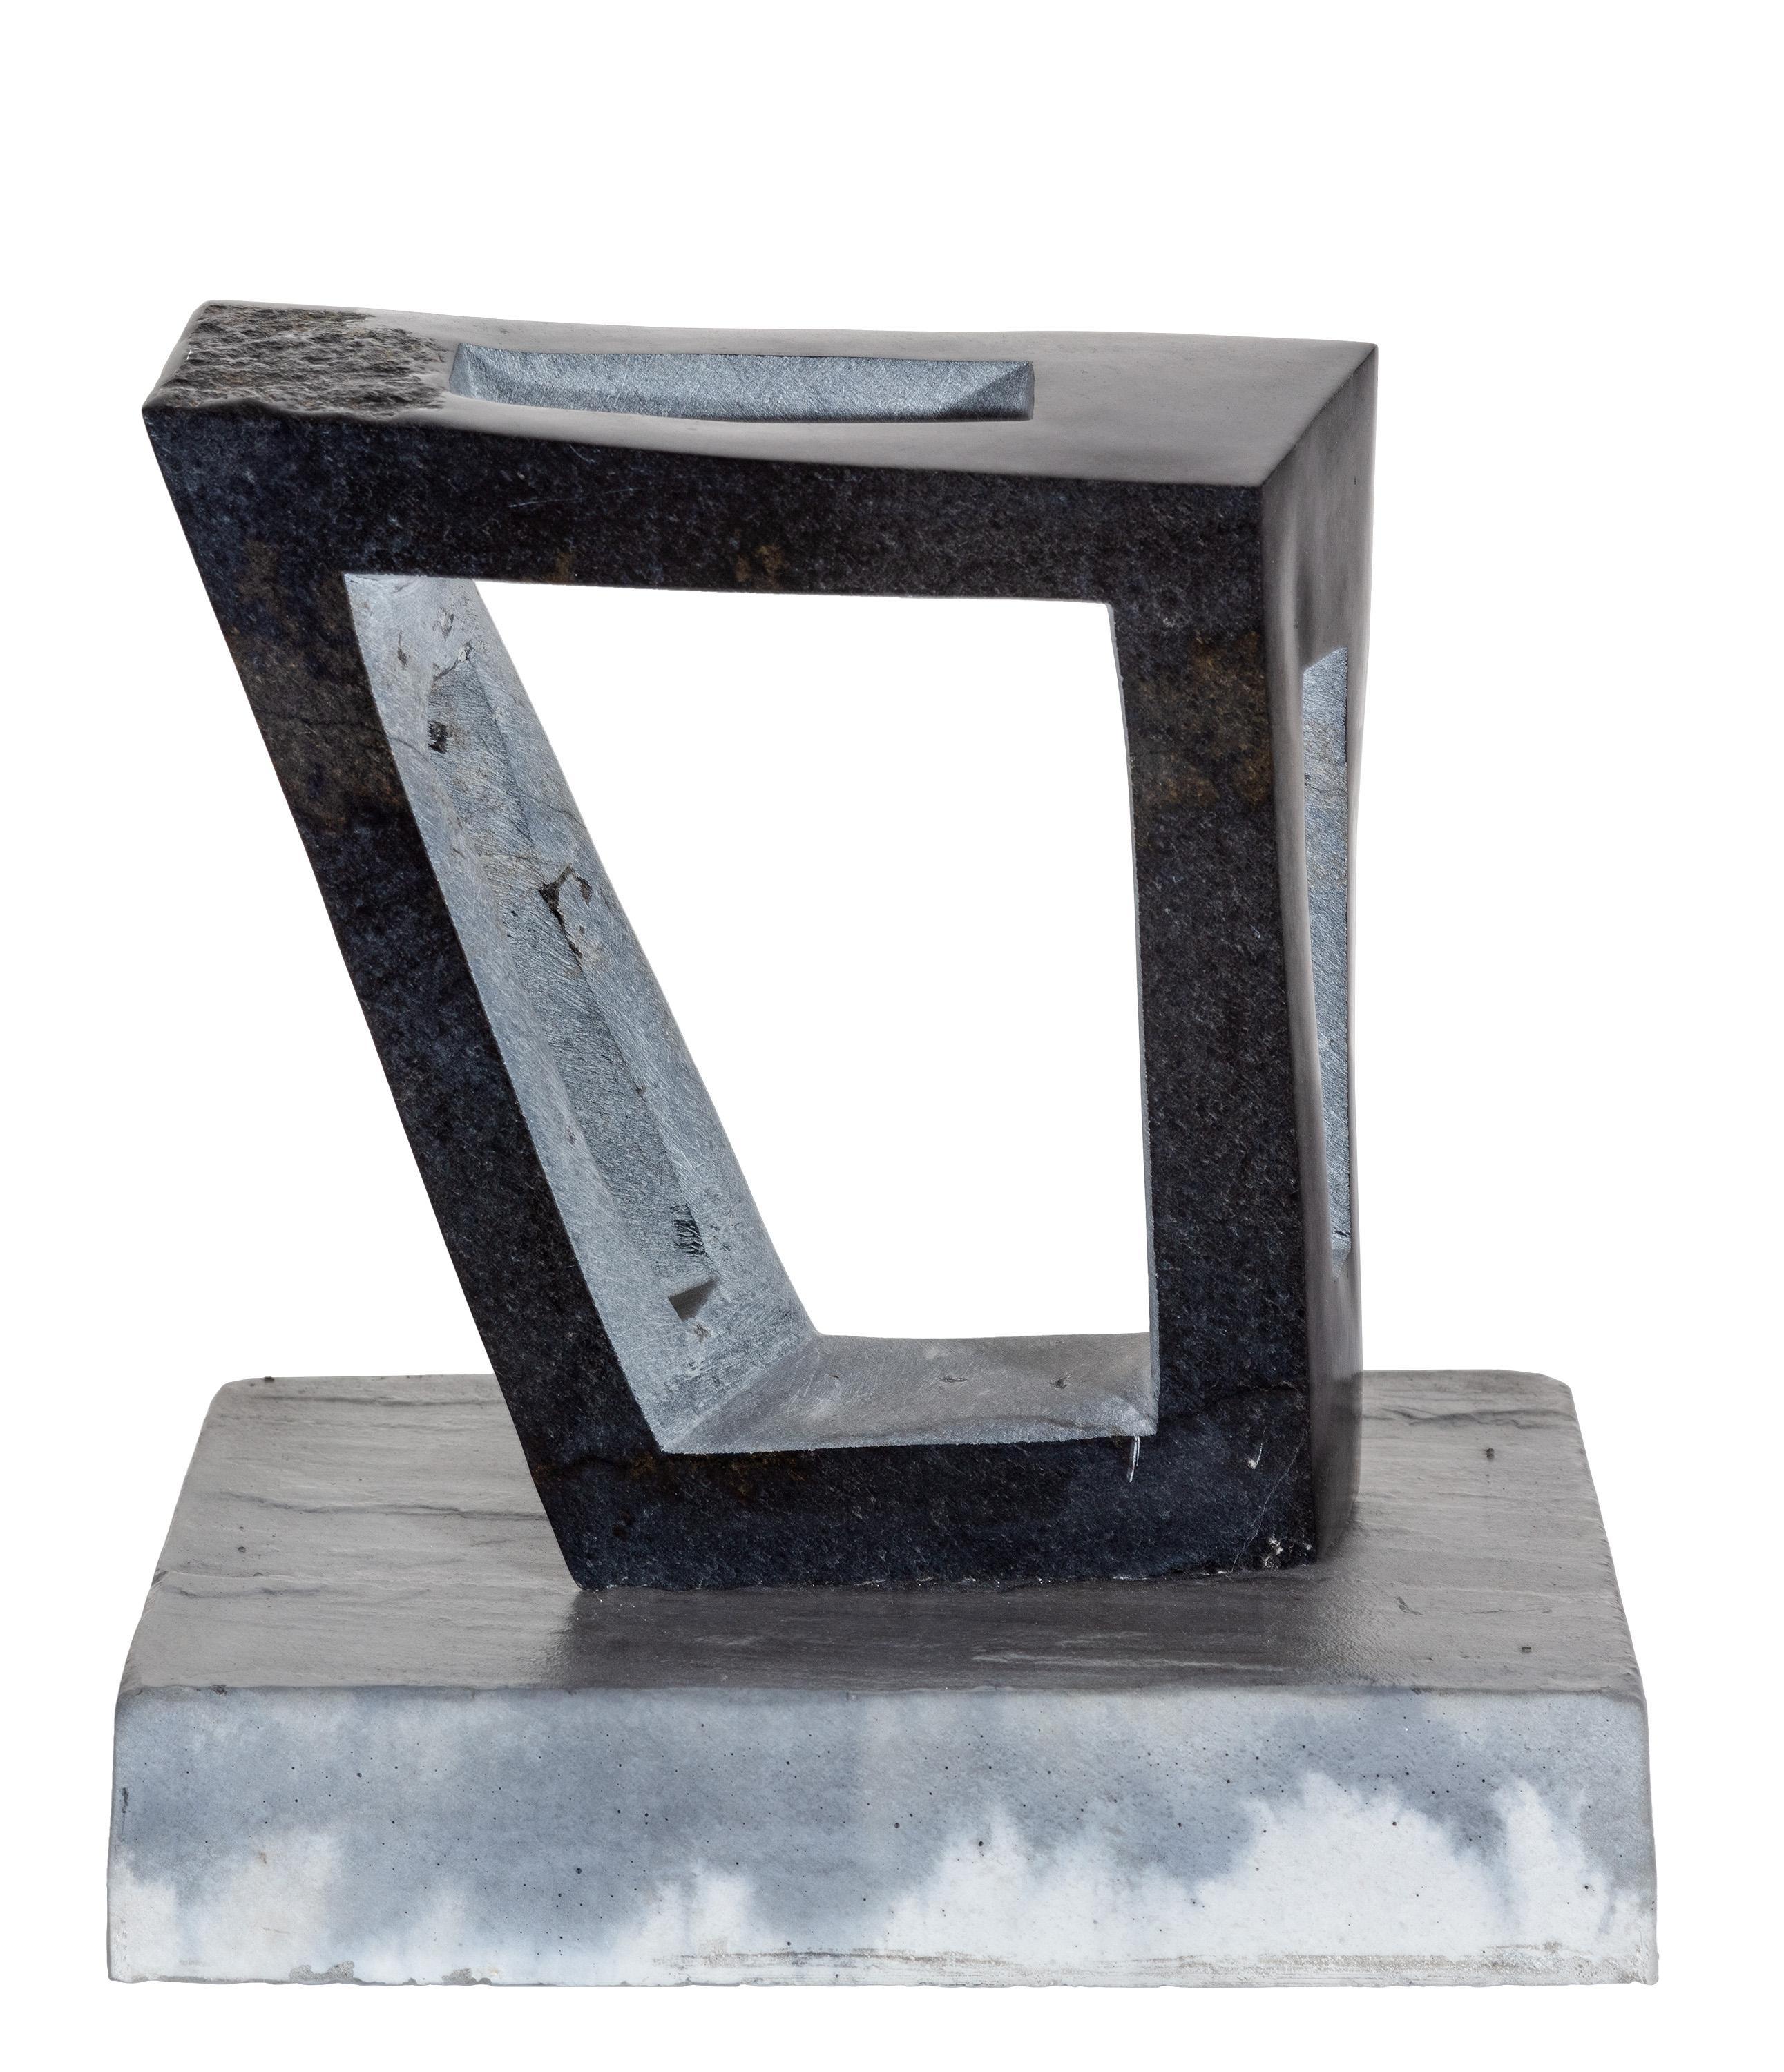 "Windows of Opportunity" is an original serpentine sculpture by Van Damn. The artist signed the piece "Vandee" on the back bottom right of the sculpture. 

Sculpture Size: 9 5/8" x 9 5/8" x 3 1/2"
Base Size: 2 1/2" x 11 5/8" x 8 3/4"
Overall Size: